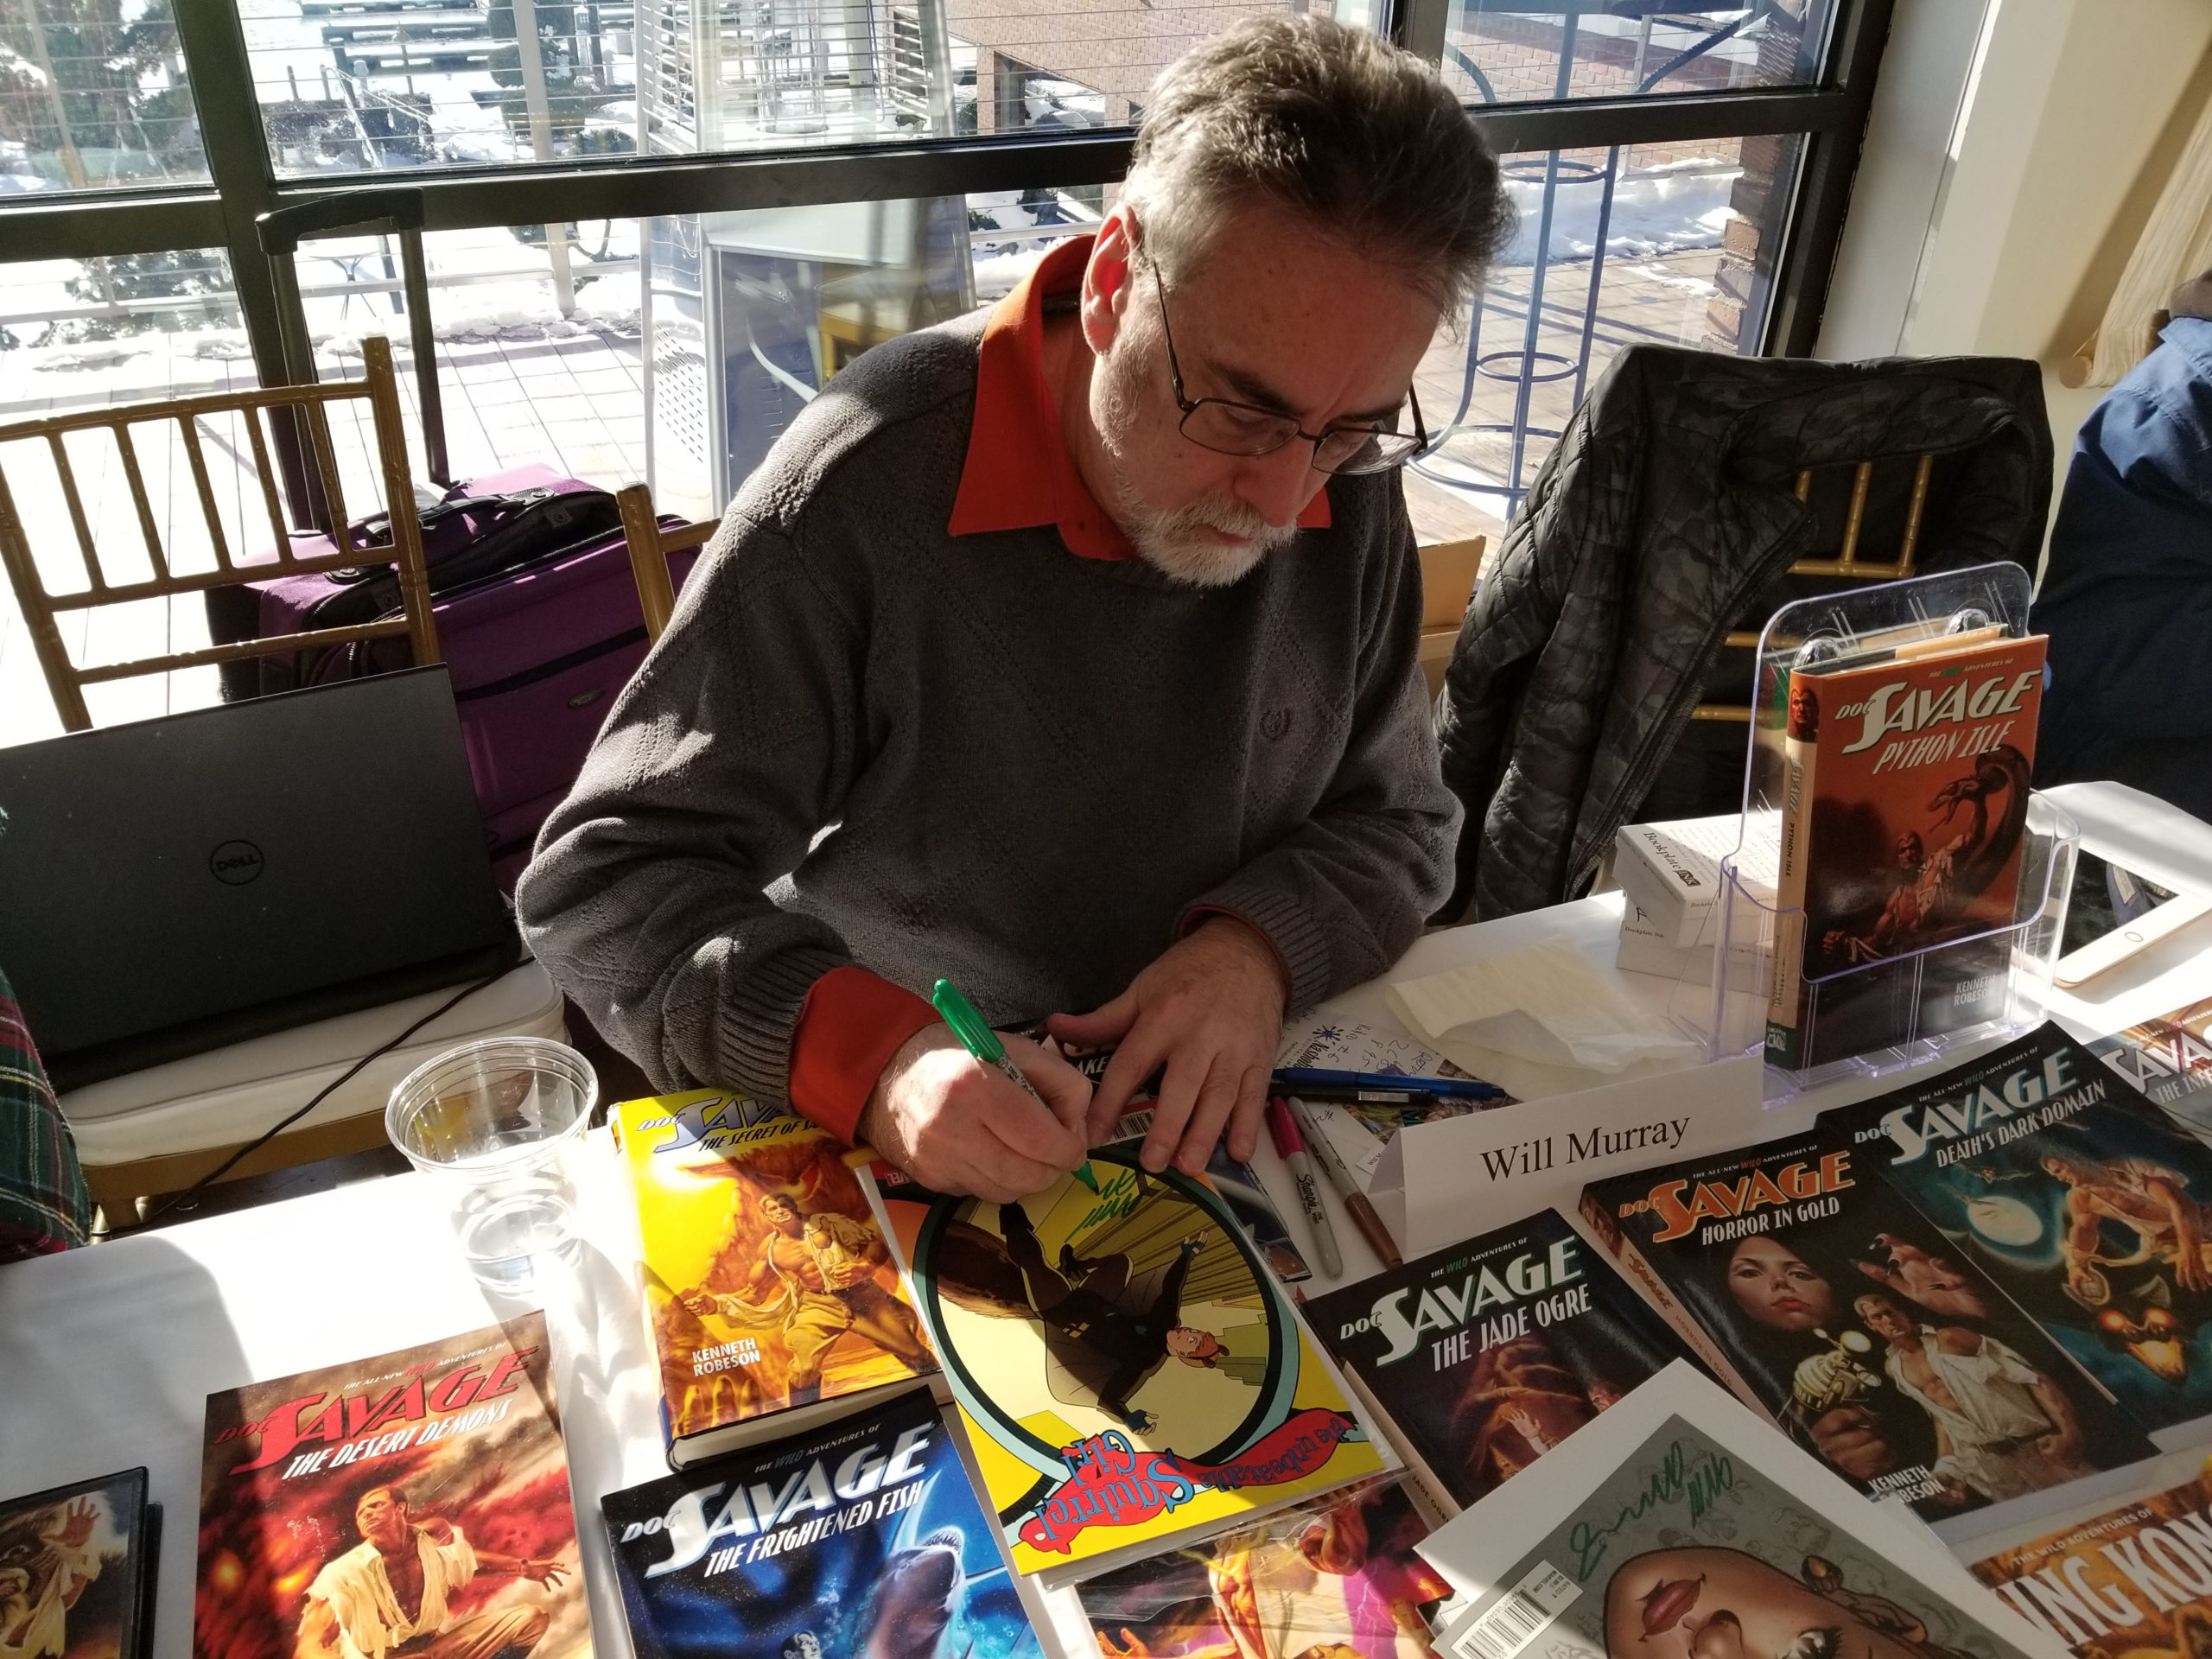 Will Murray signing a Squirrel Girl comic book. 